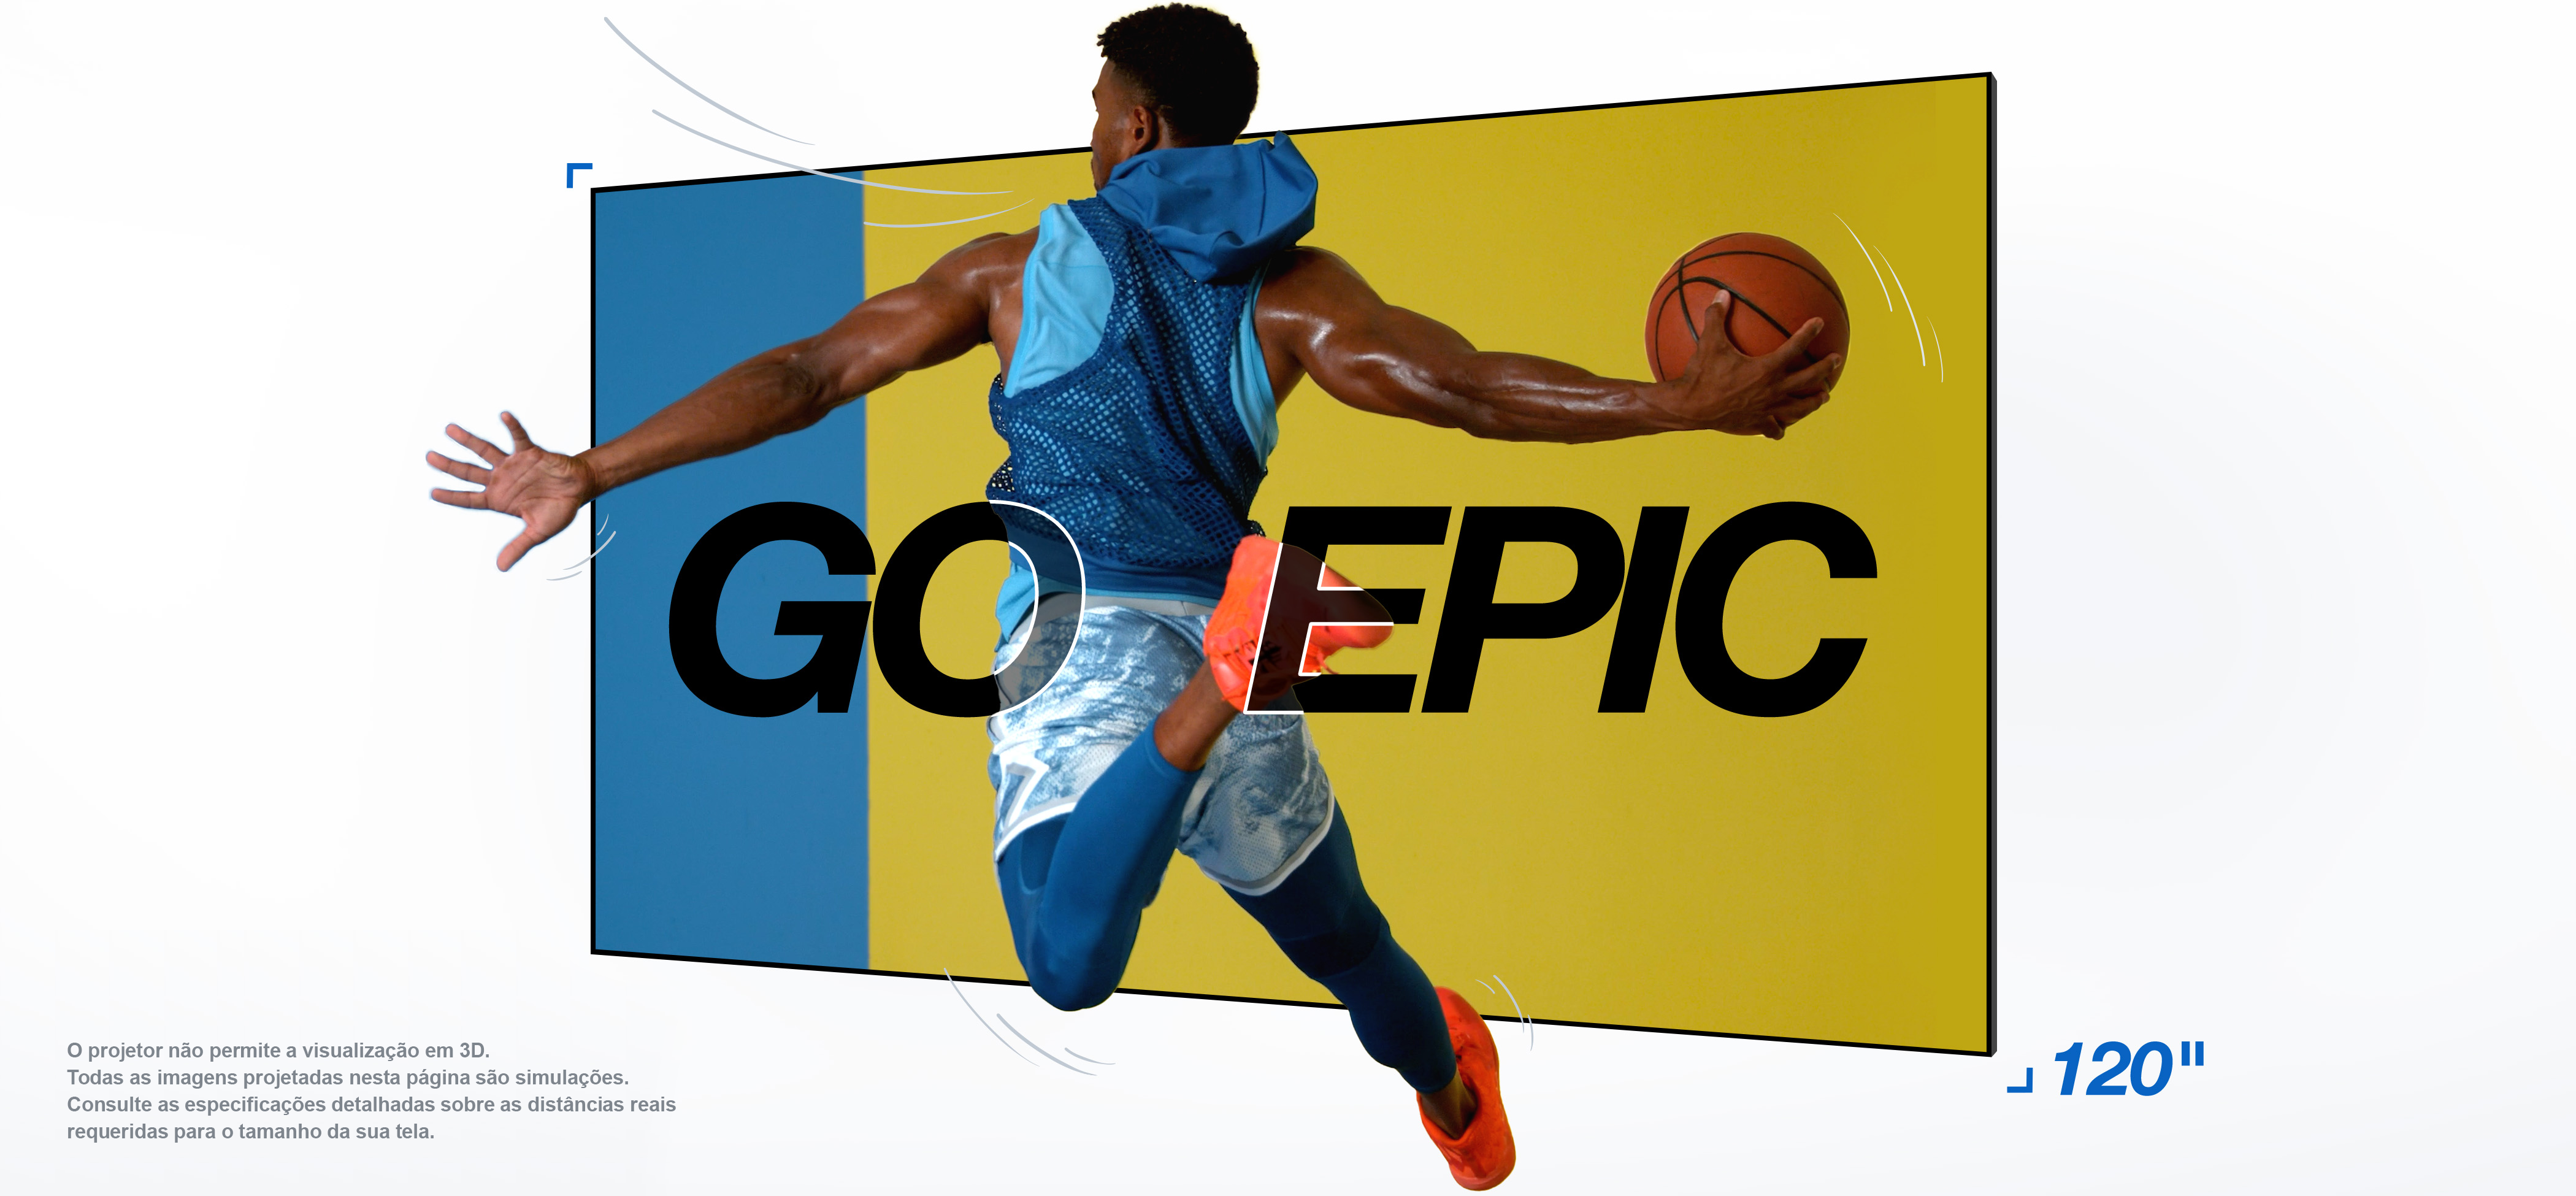 Go Epic. A 120-inch projector display featuring a basketball player. Projector does not enable 3d viewing.